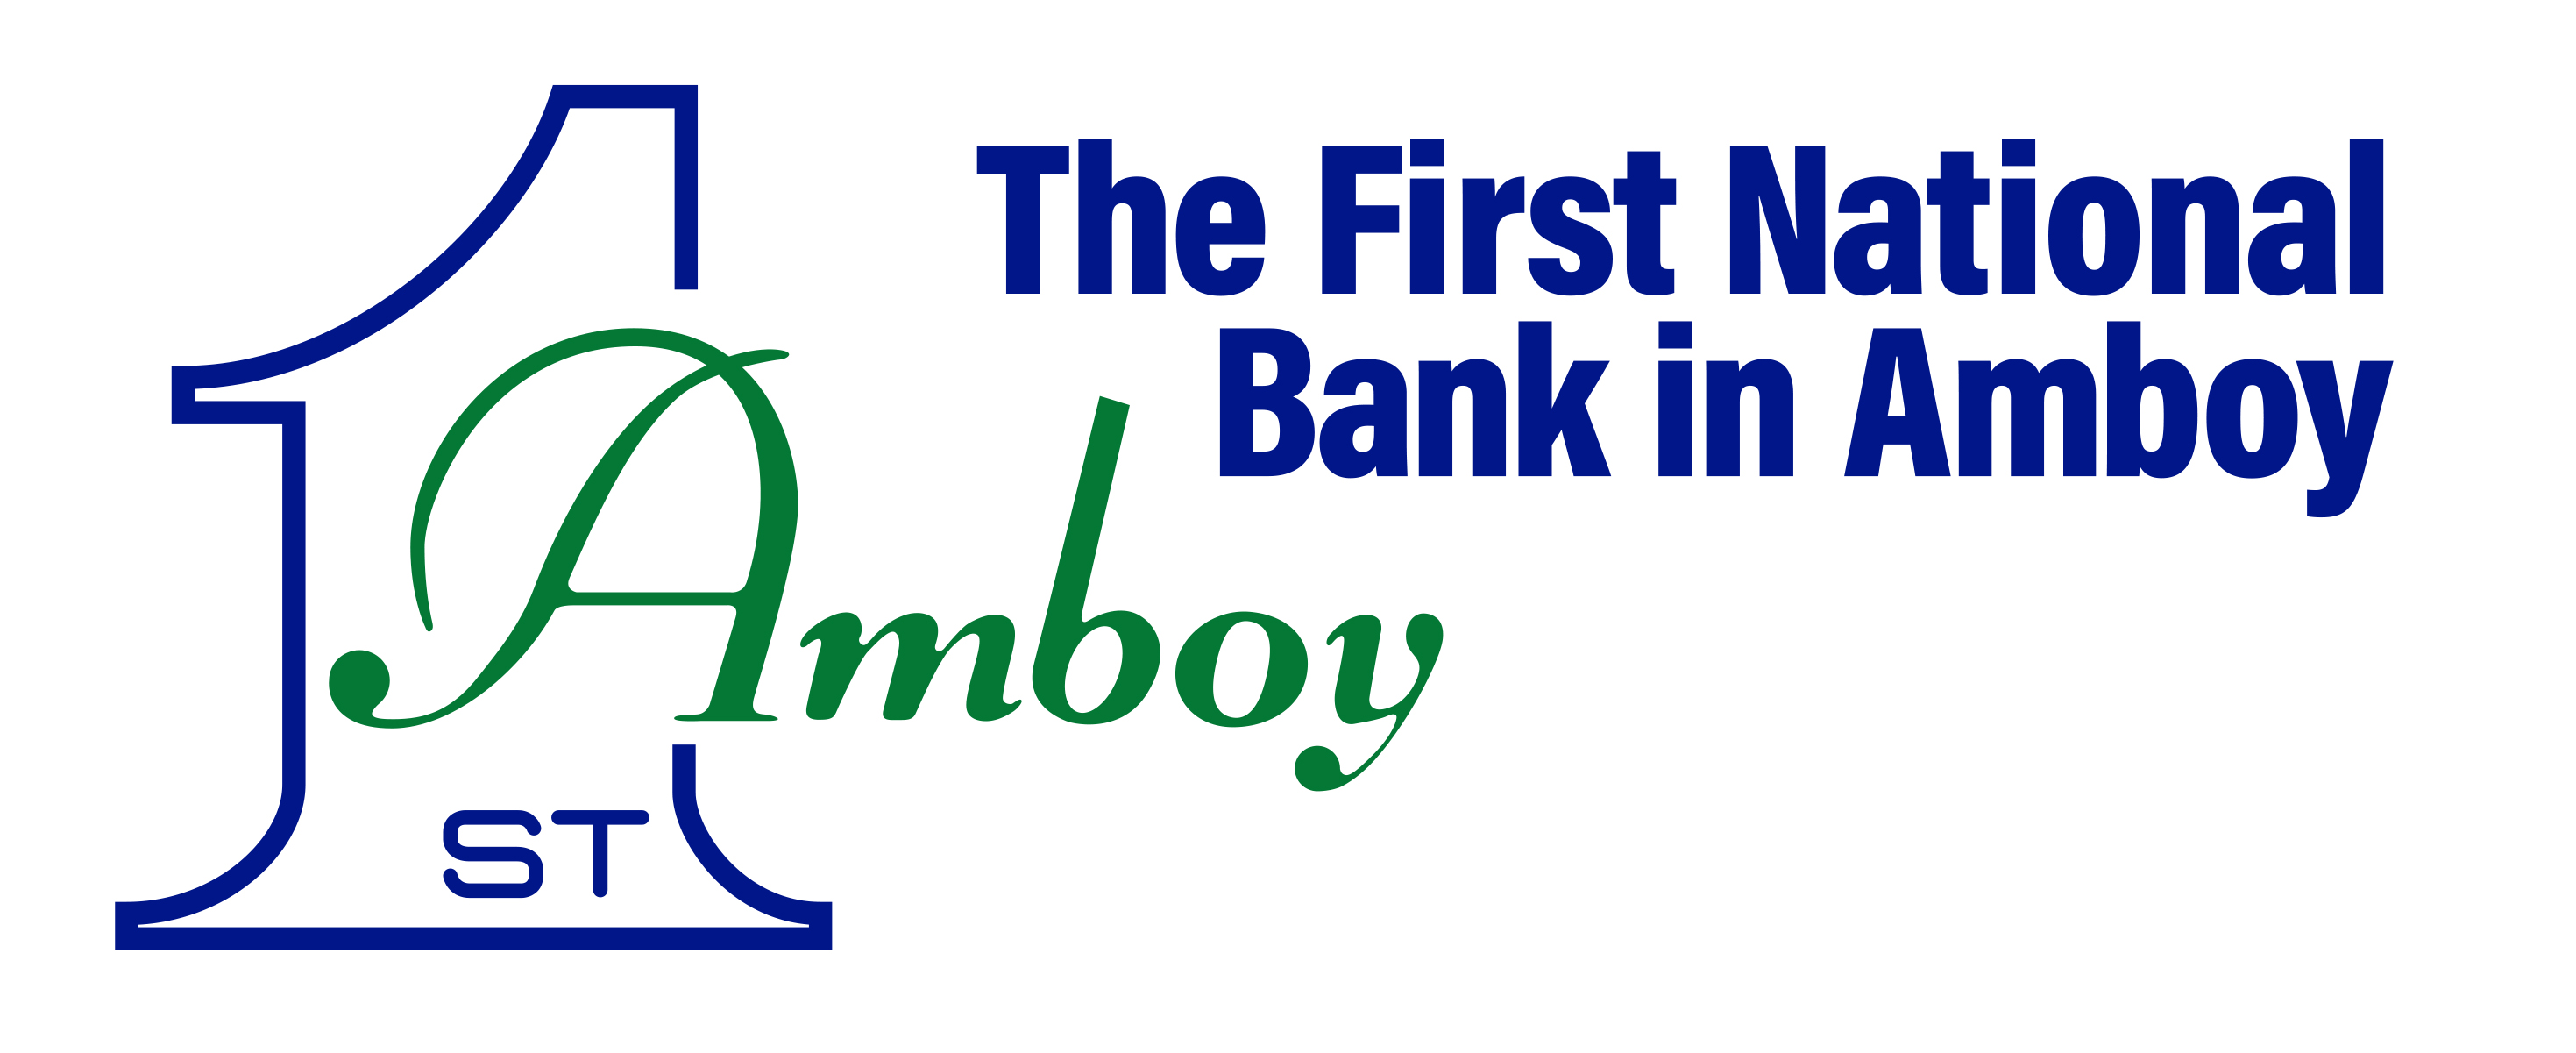 First National Bank of Amboy